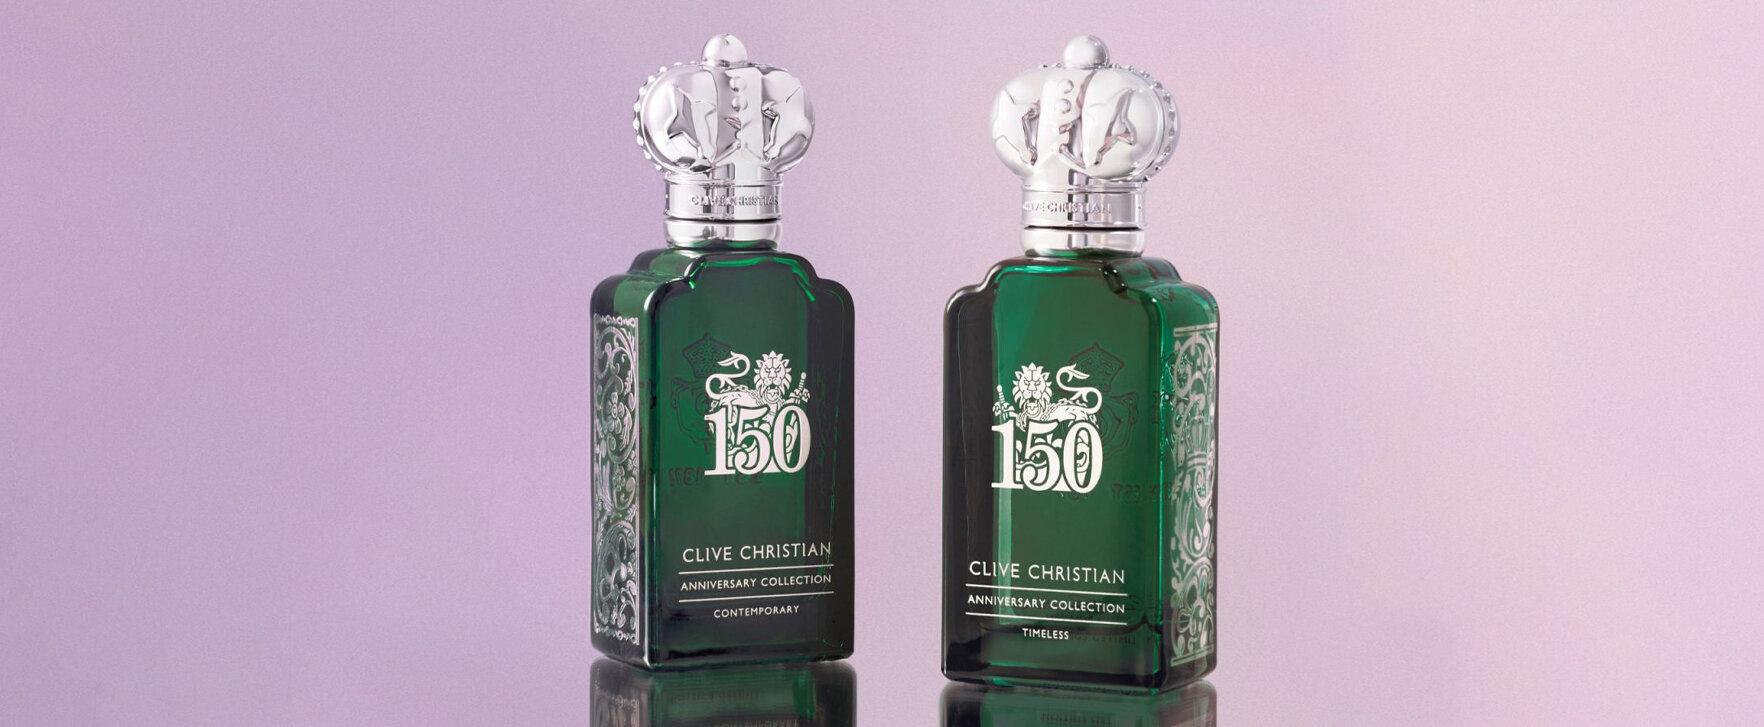 “Anniversary Collection - 150” - Limited Series by Clive Christian Launched With Two New Fragrances